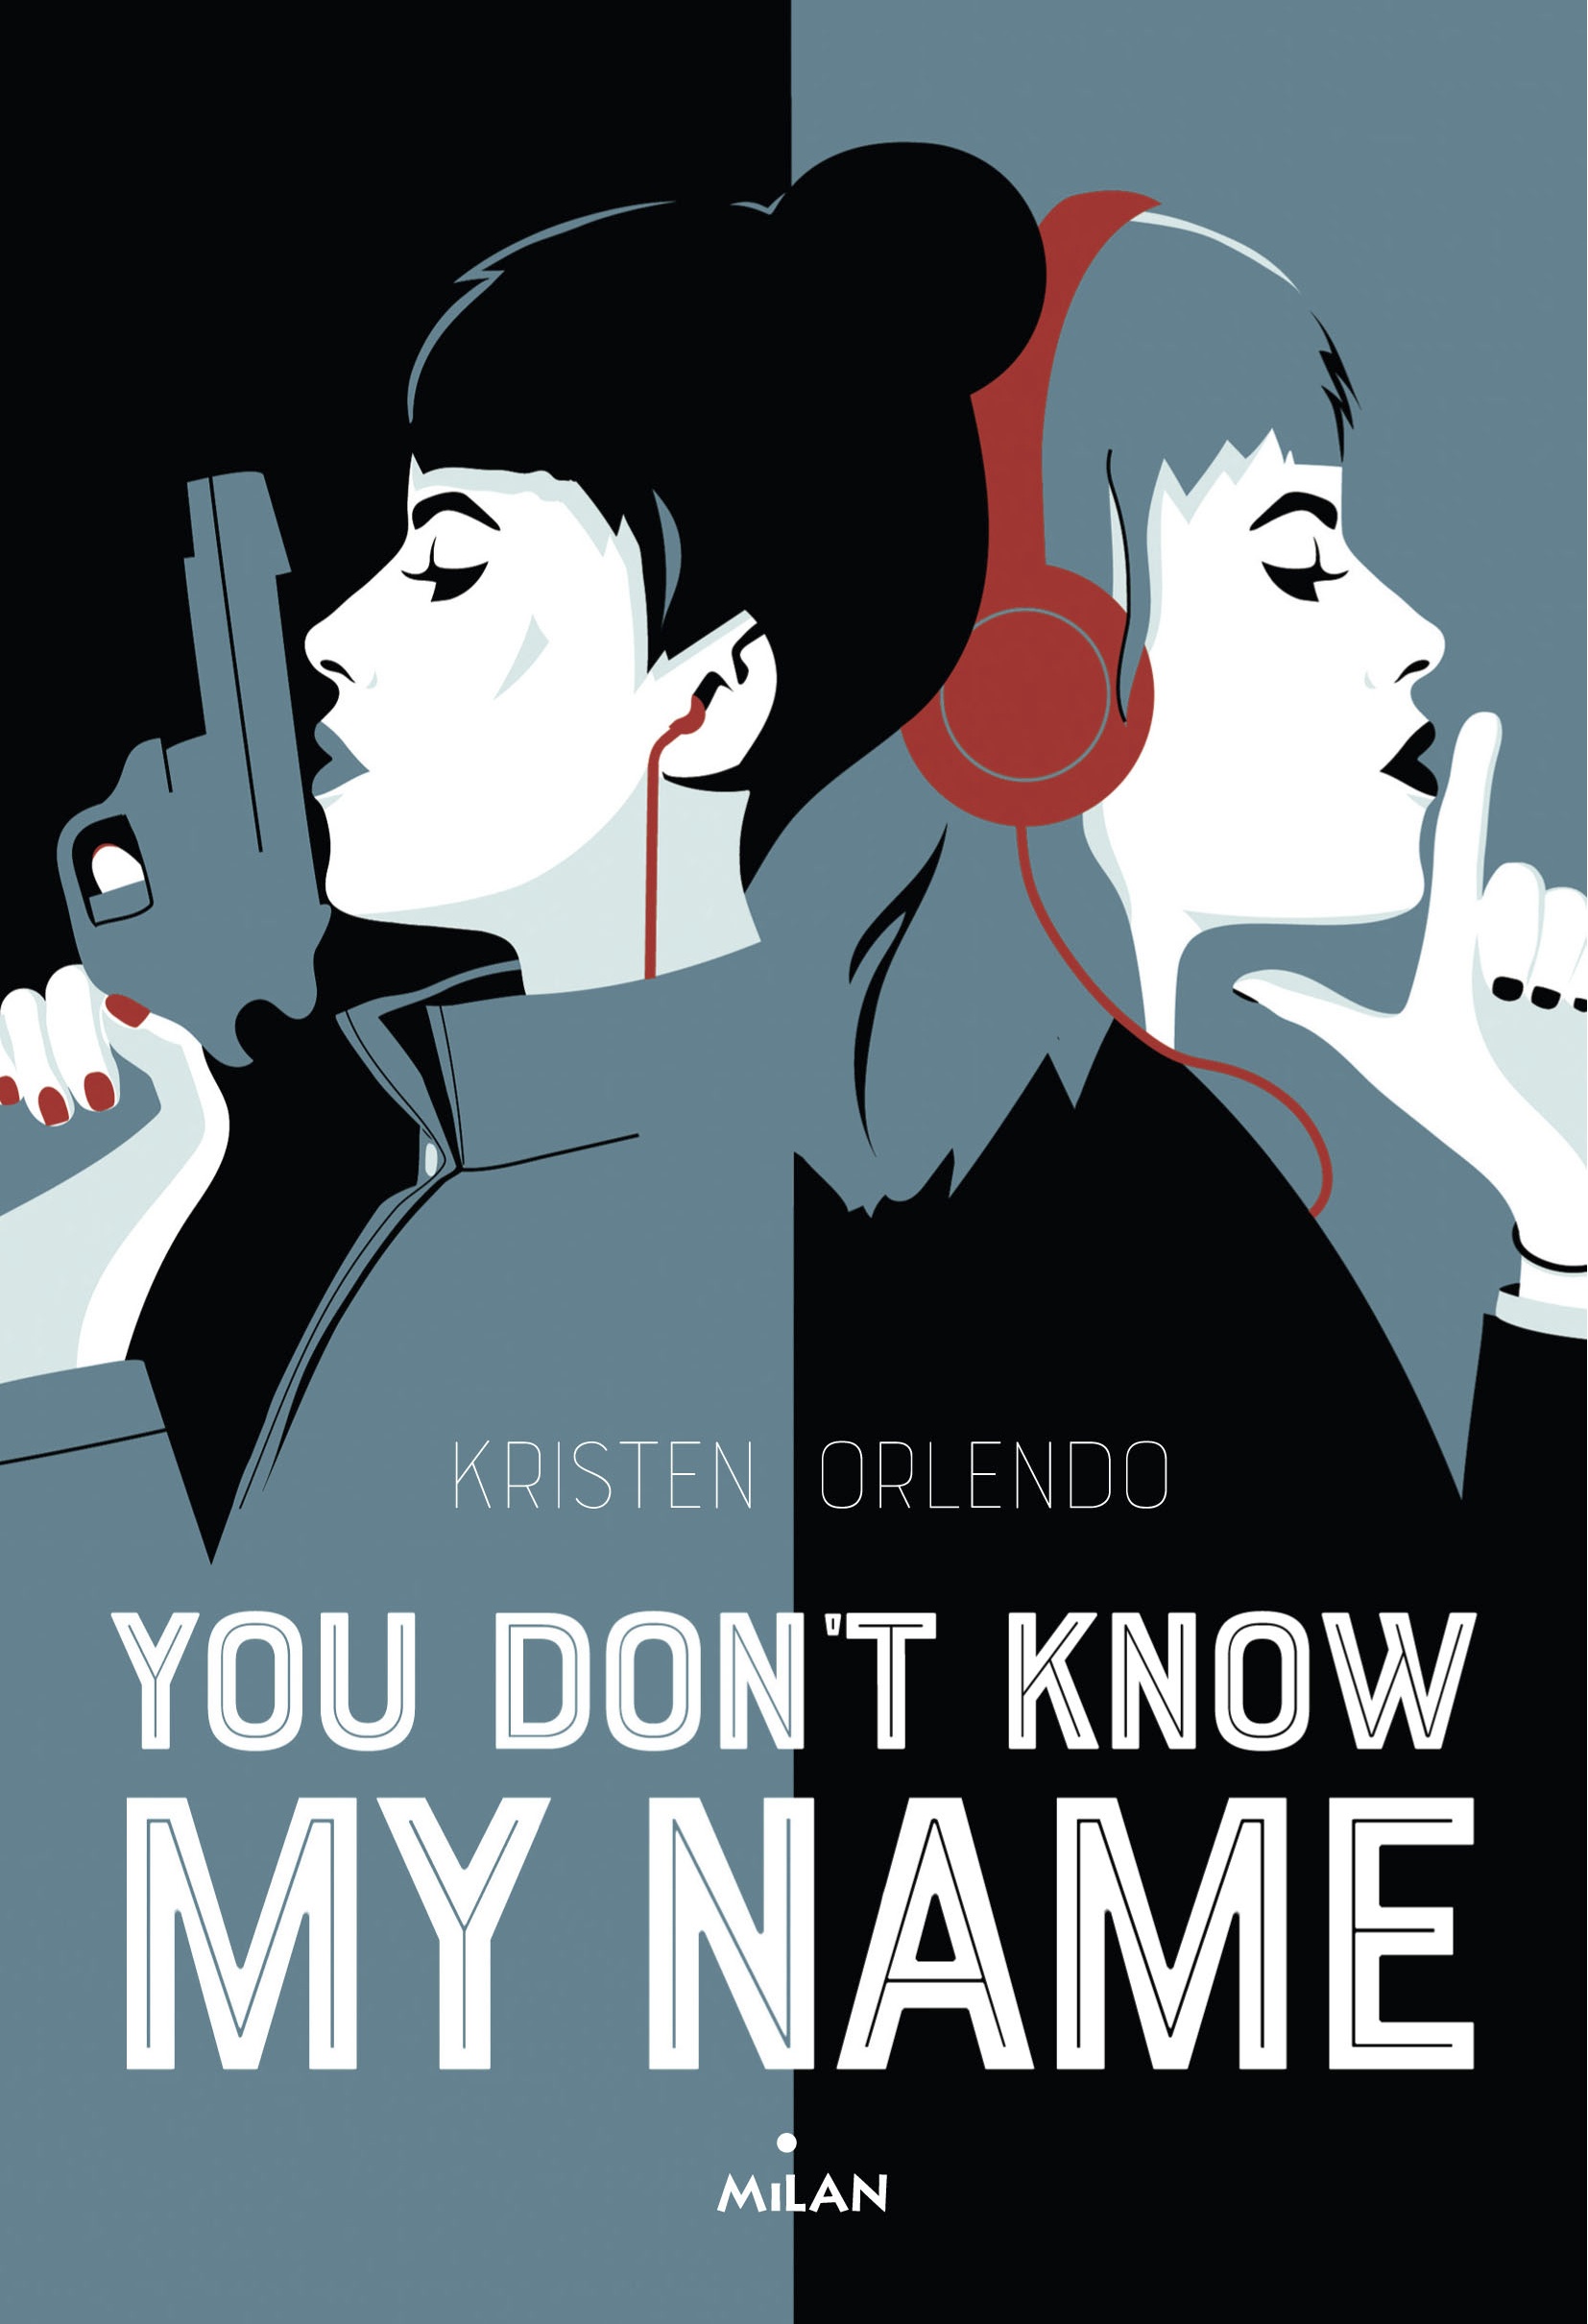 You don't know my name